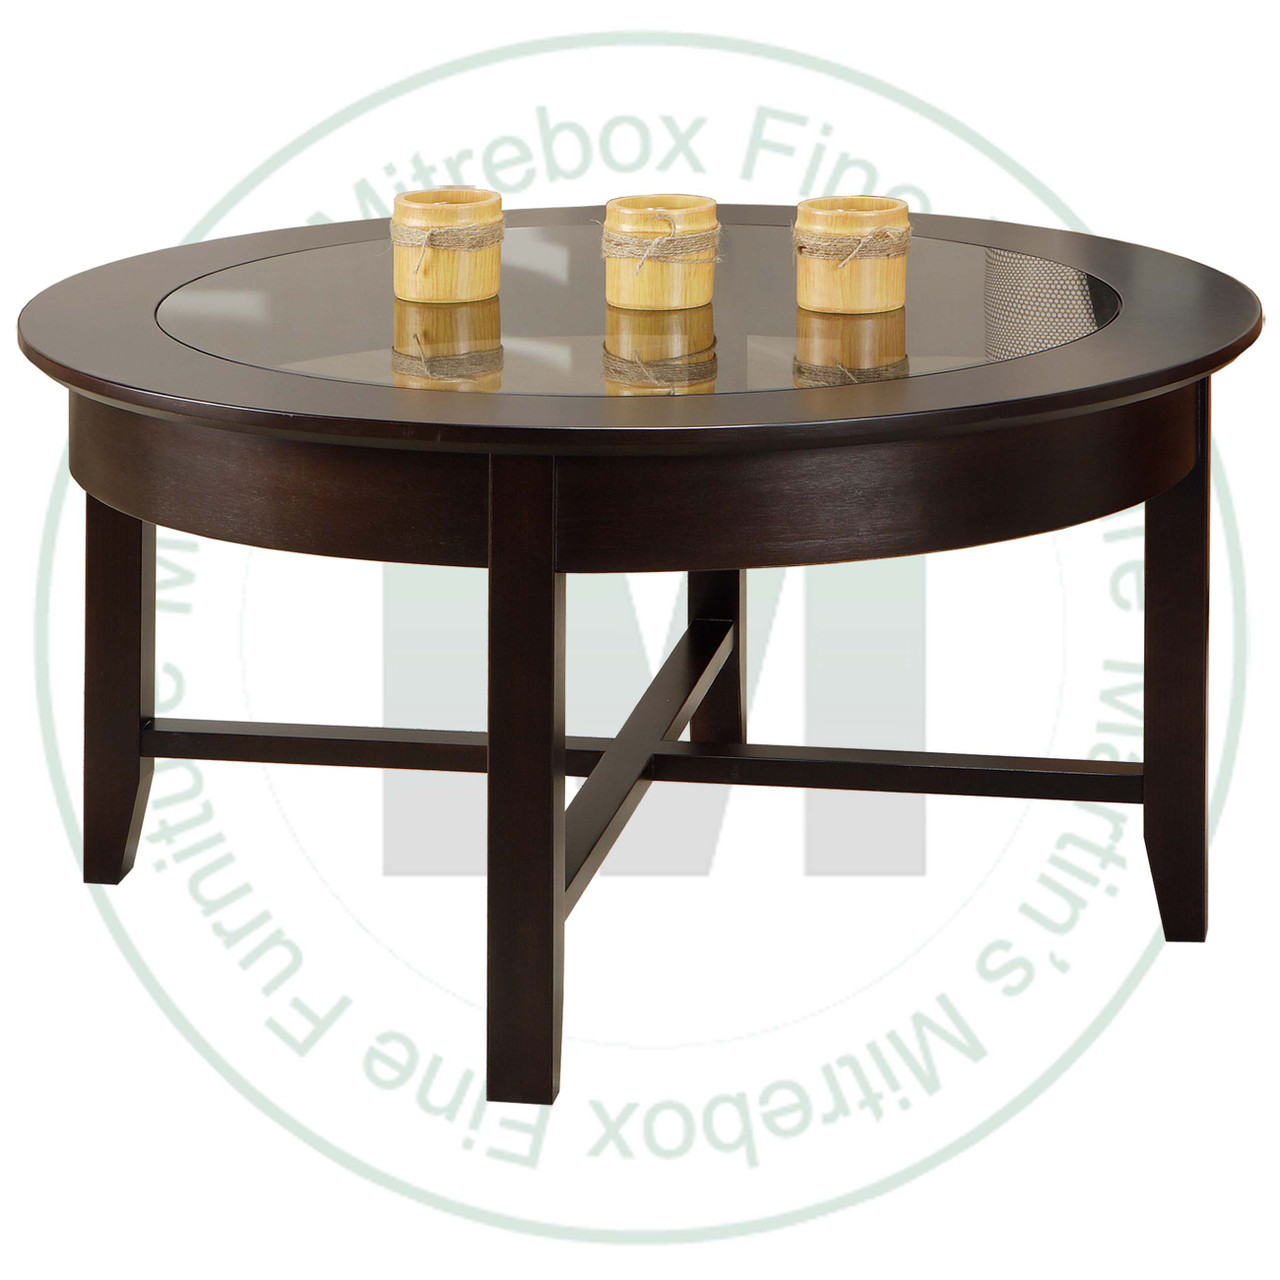 Maple Demilune Round Coffee Table 36''D x 36''W x 19''H With Glass Top